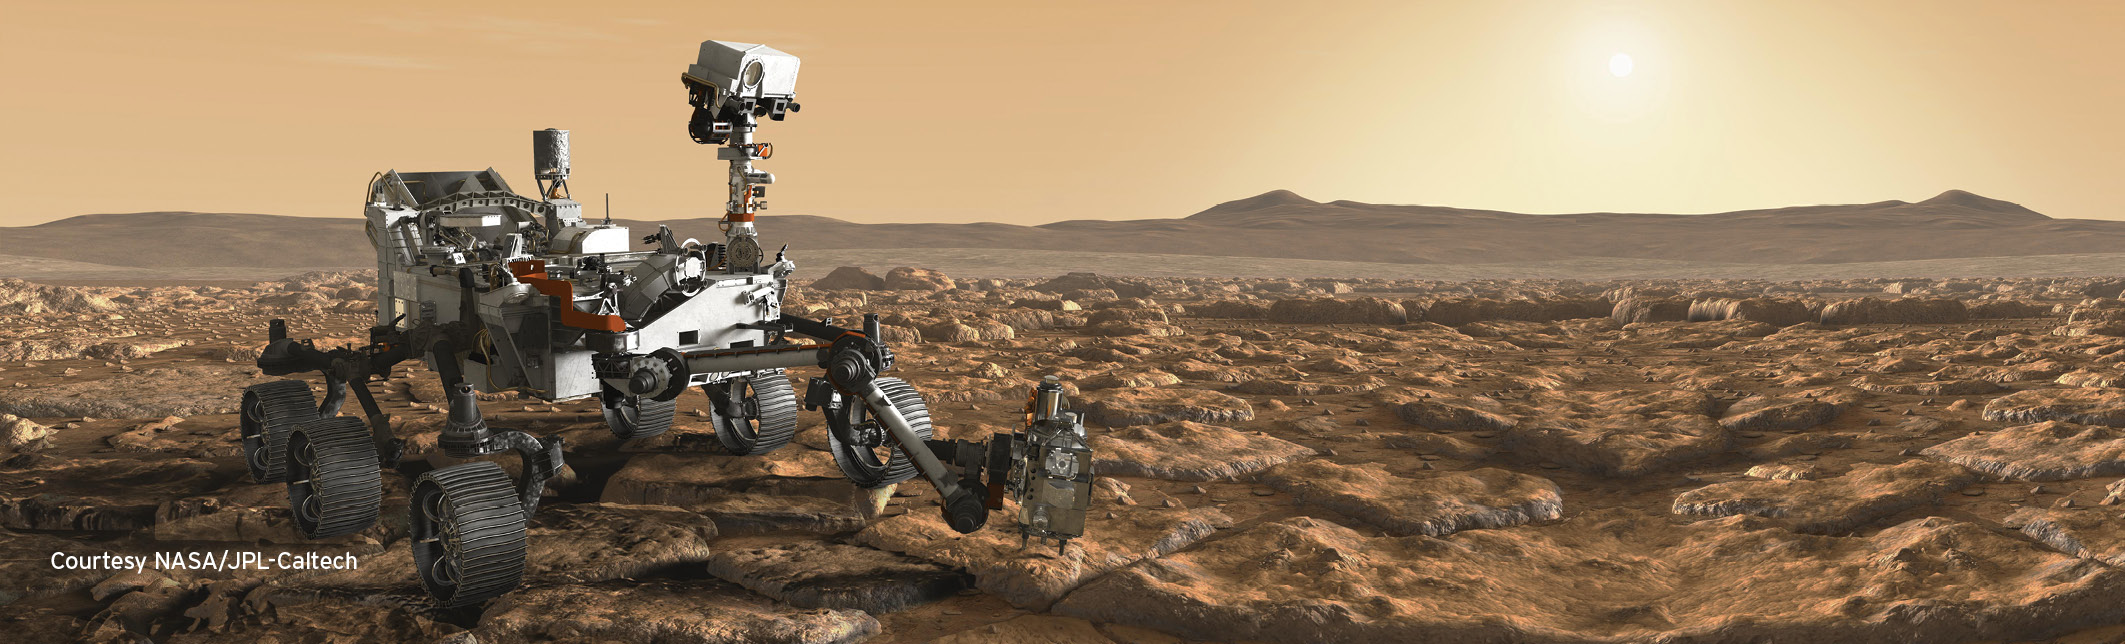 Our Engineered Products Team Built Custom Resolvers Featured on the Mars 2020 Mission